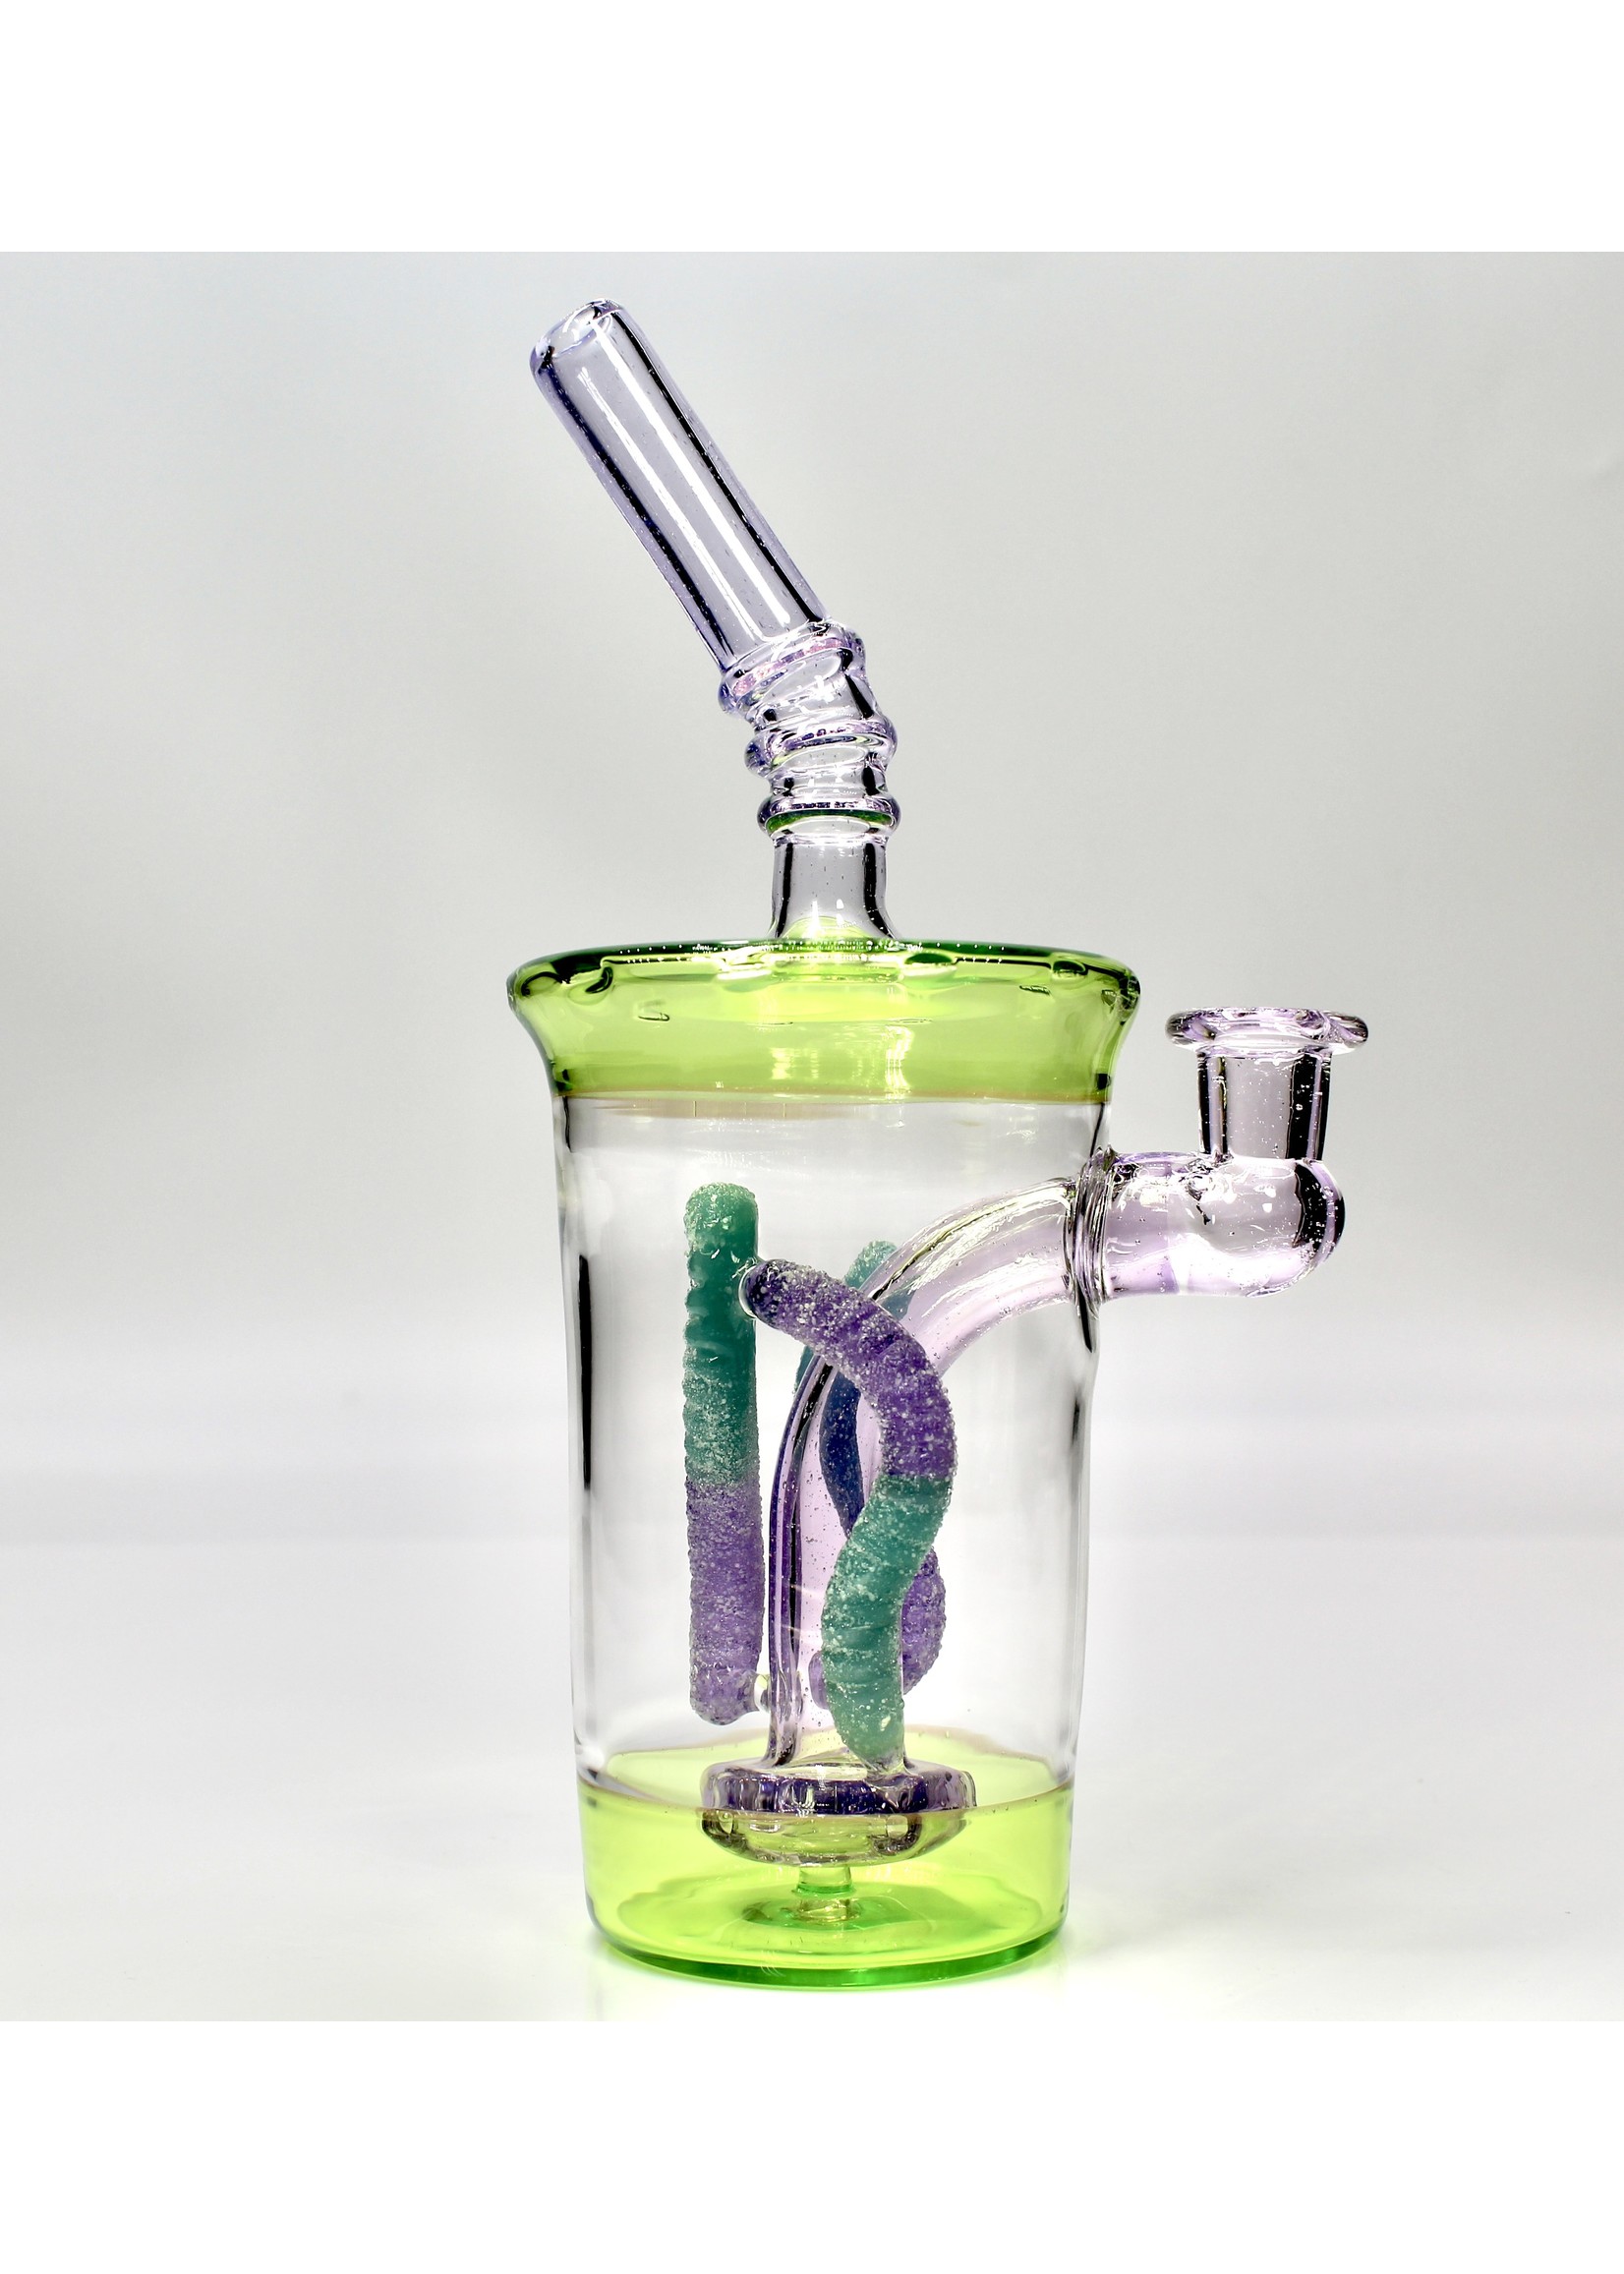 Emperial Glass Emperial Glass Cup Rig #1